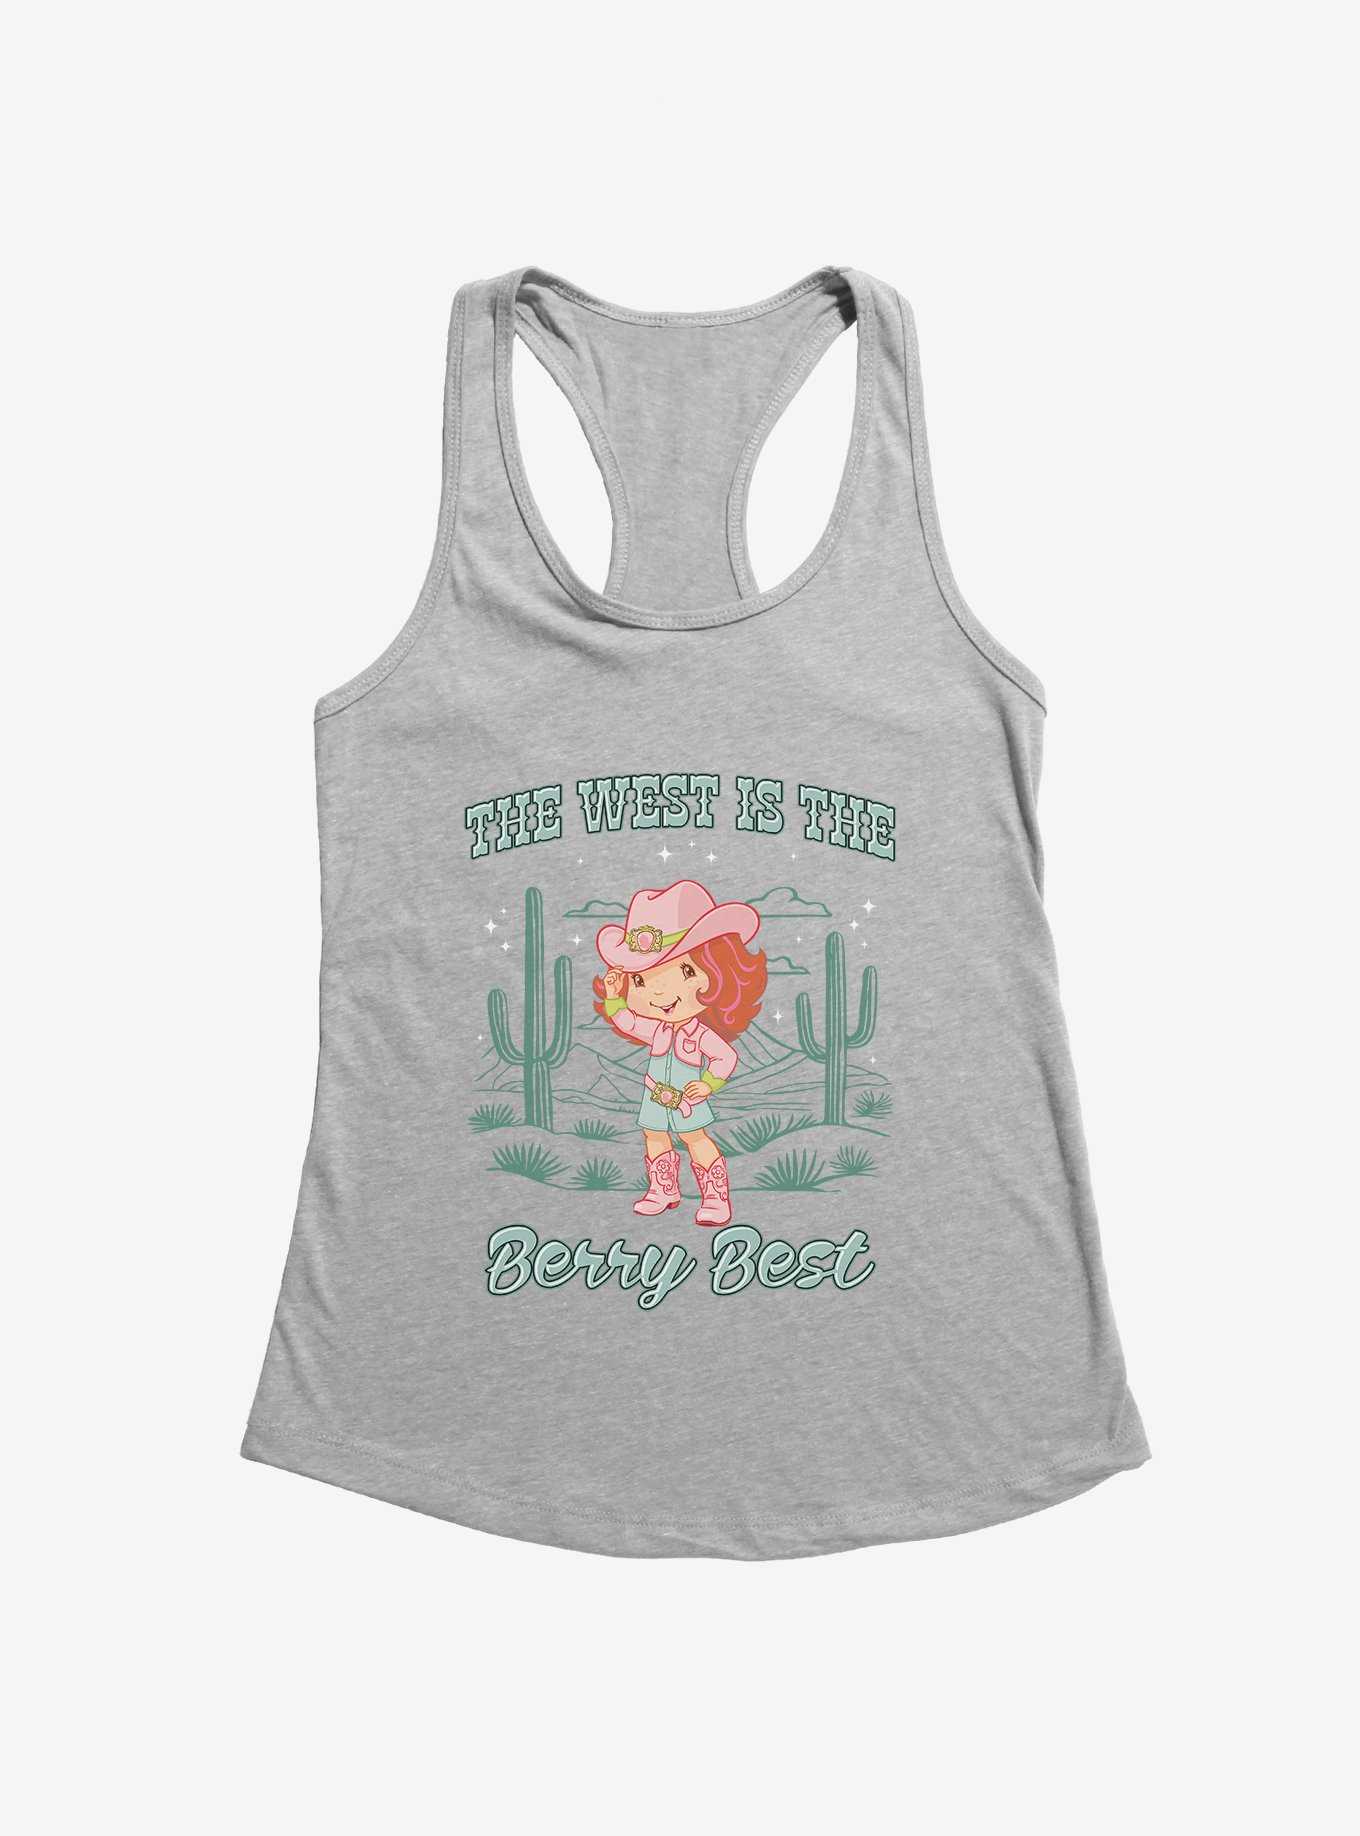 Strawberry Shortcake The West Is The Berry Best Girls Tank, , hi-res